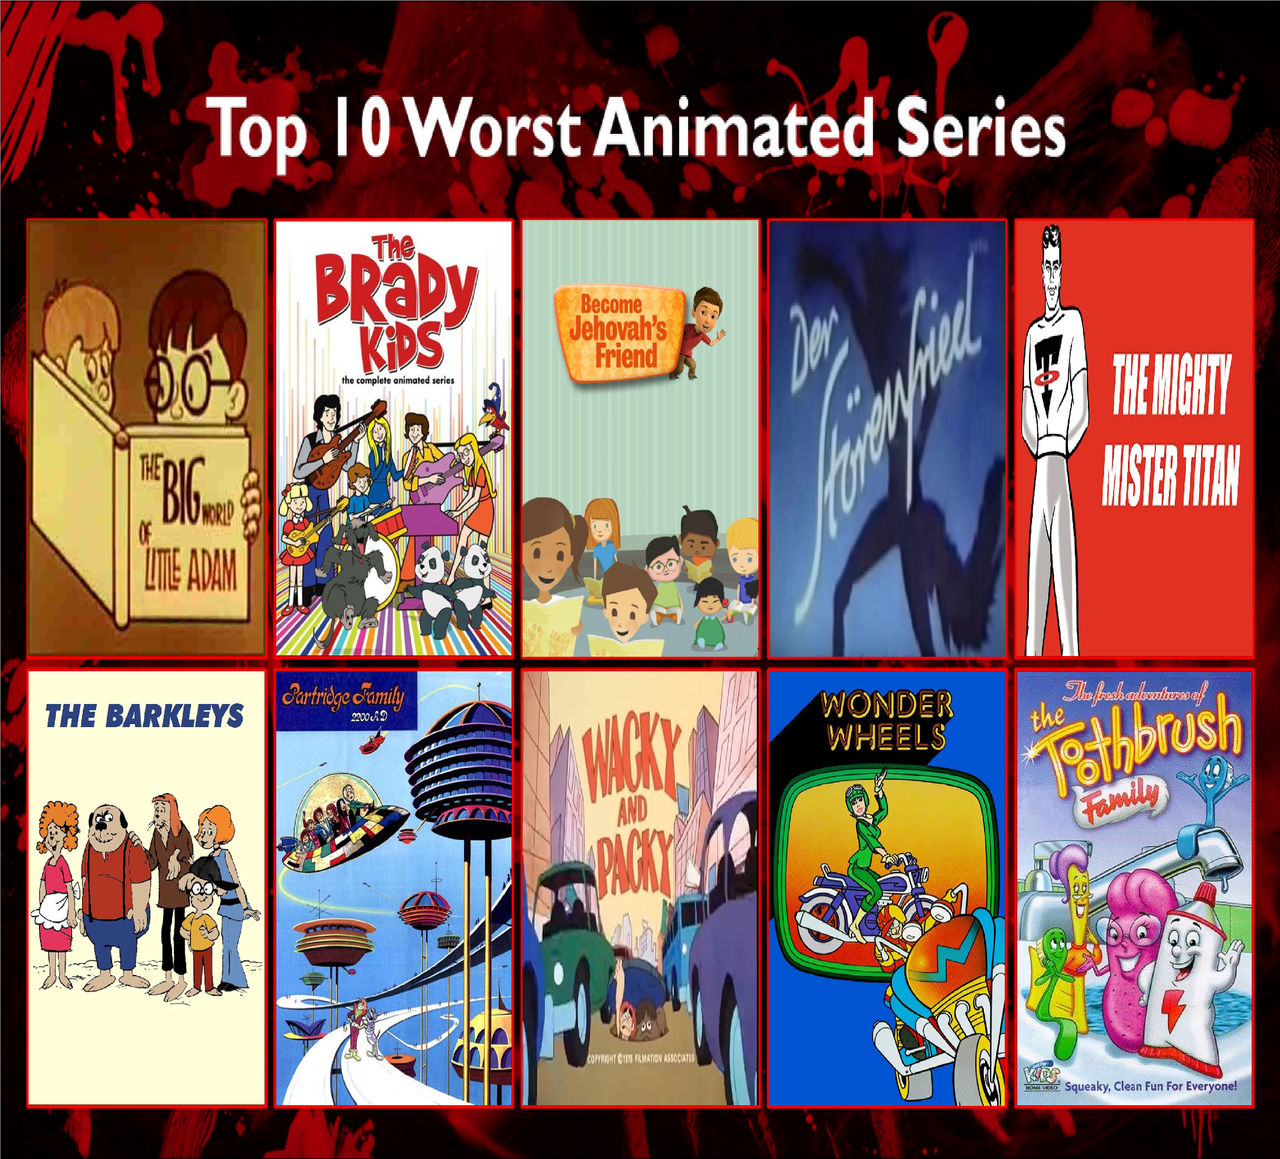 Top 10 Worst Animated Series Part 7 by Perro2017 on DeviantArt